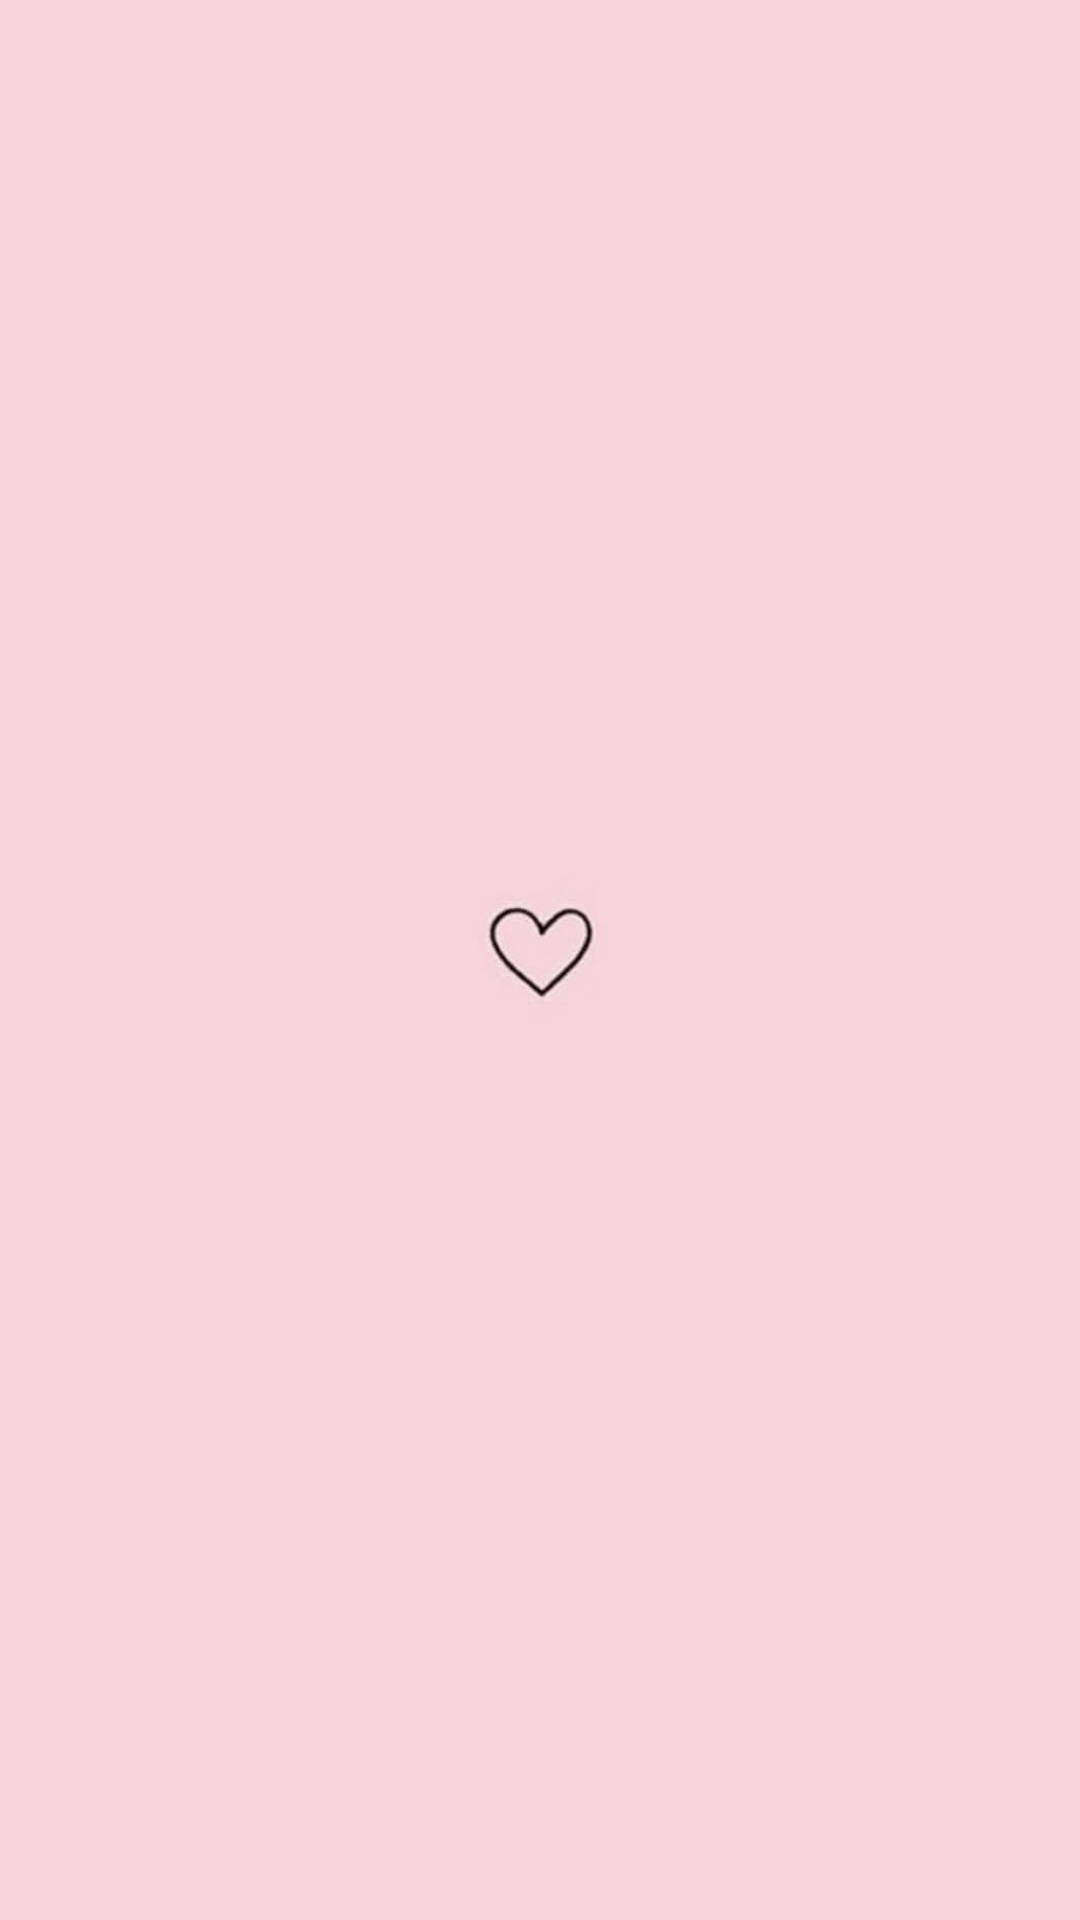 Simple Pink Aesthetic Heart Background